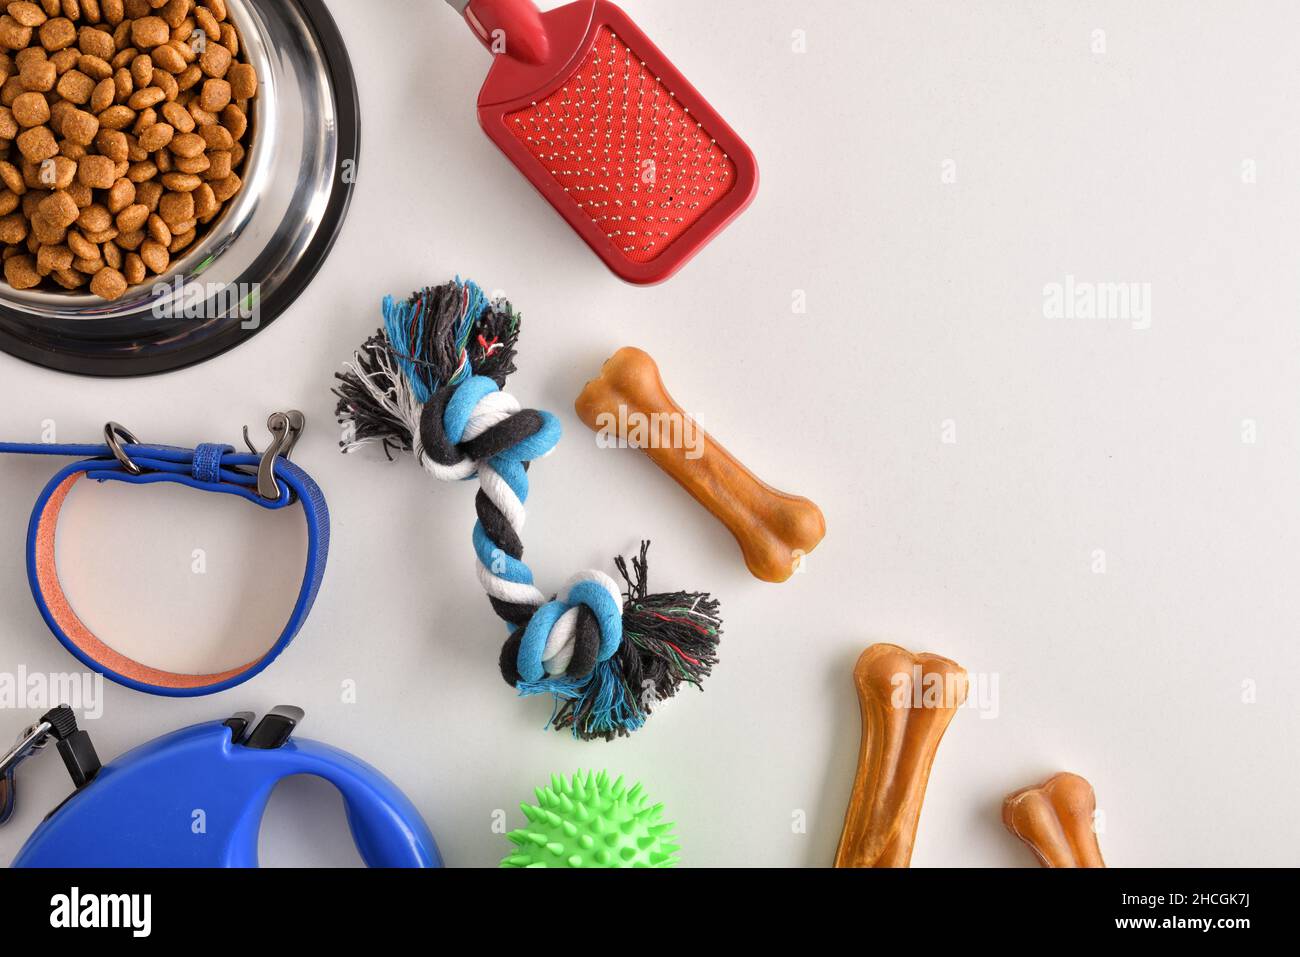 Food and accessories for walk, play and body care for the dog on white table. Top view. Horizontal composition. Stock Photo